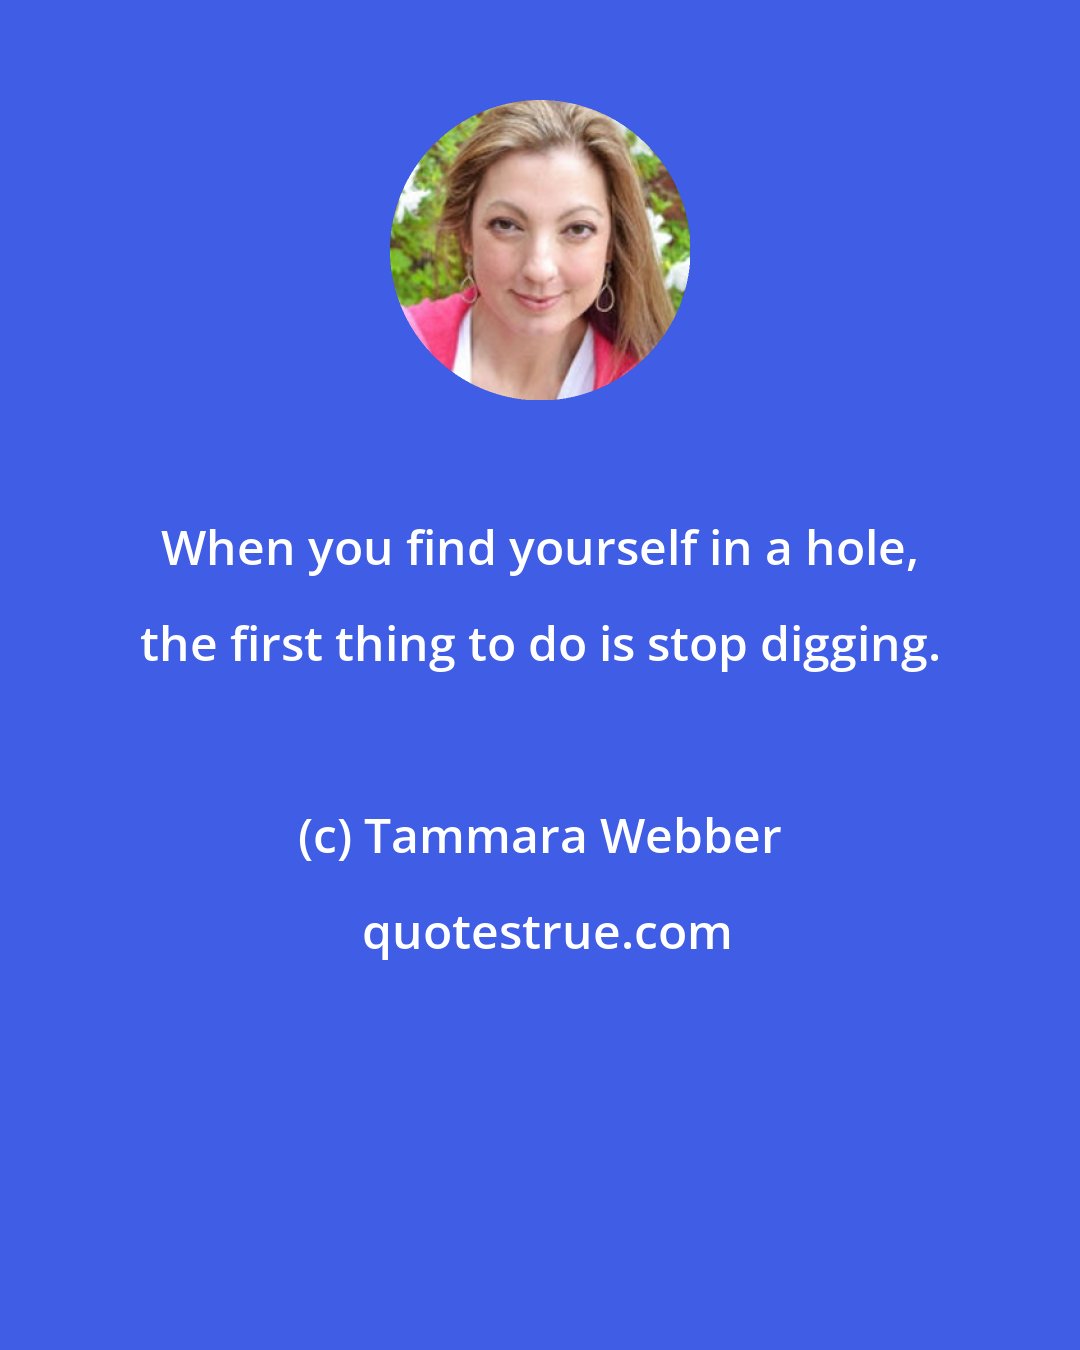 Tammara Webber: When you find yourself in a hole, the first thing to do is stop digging.